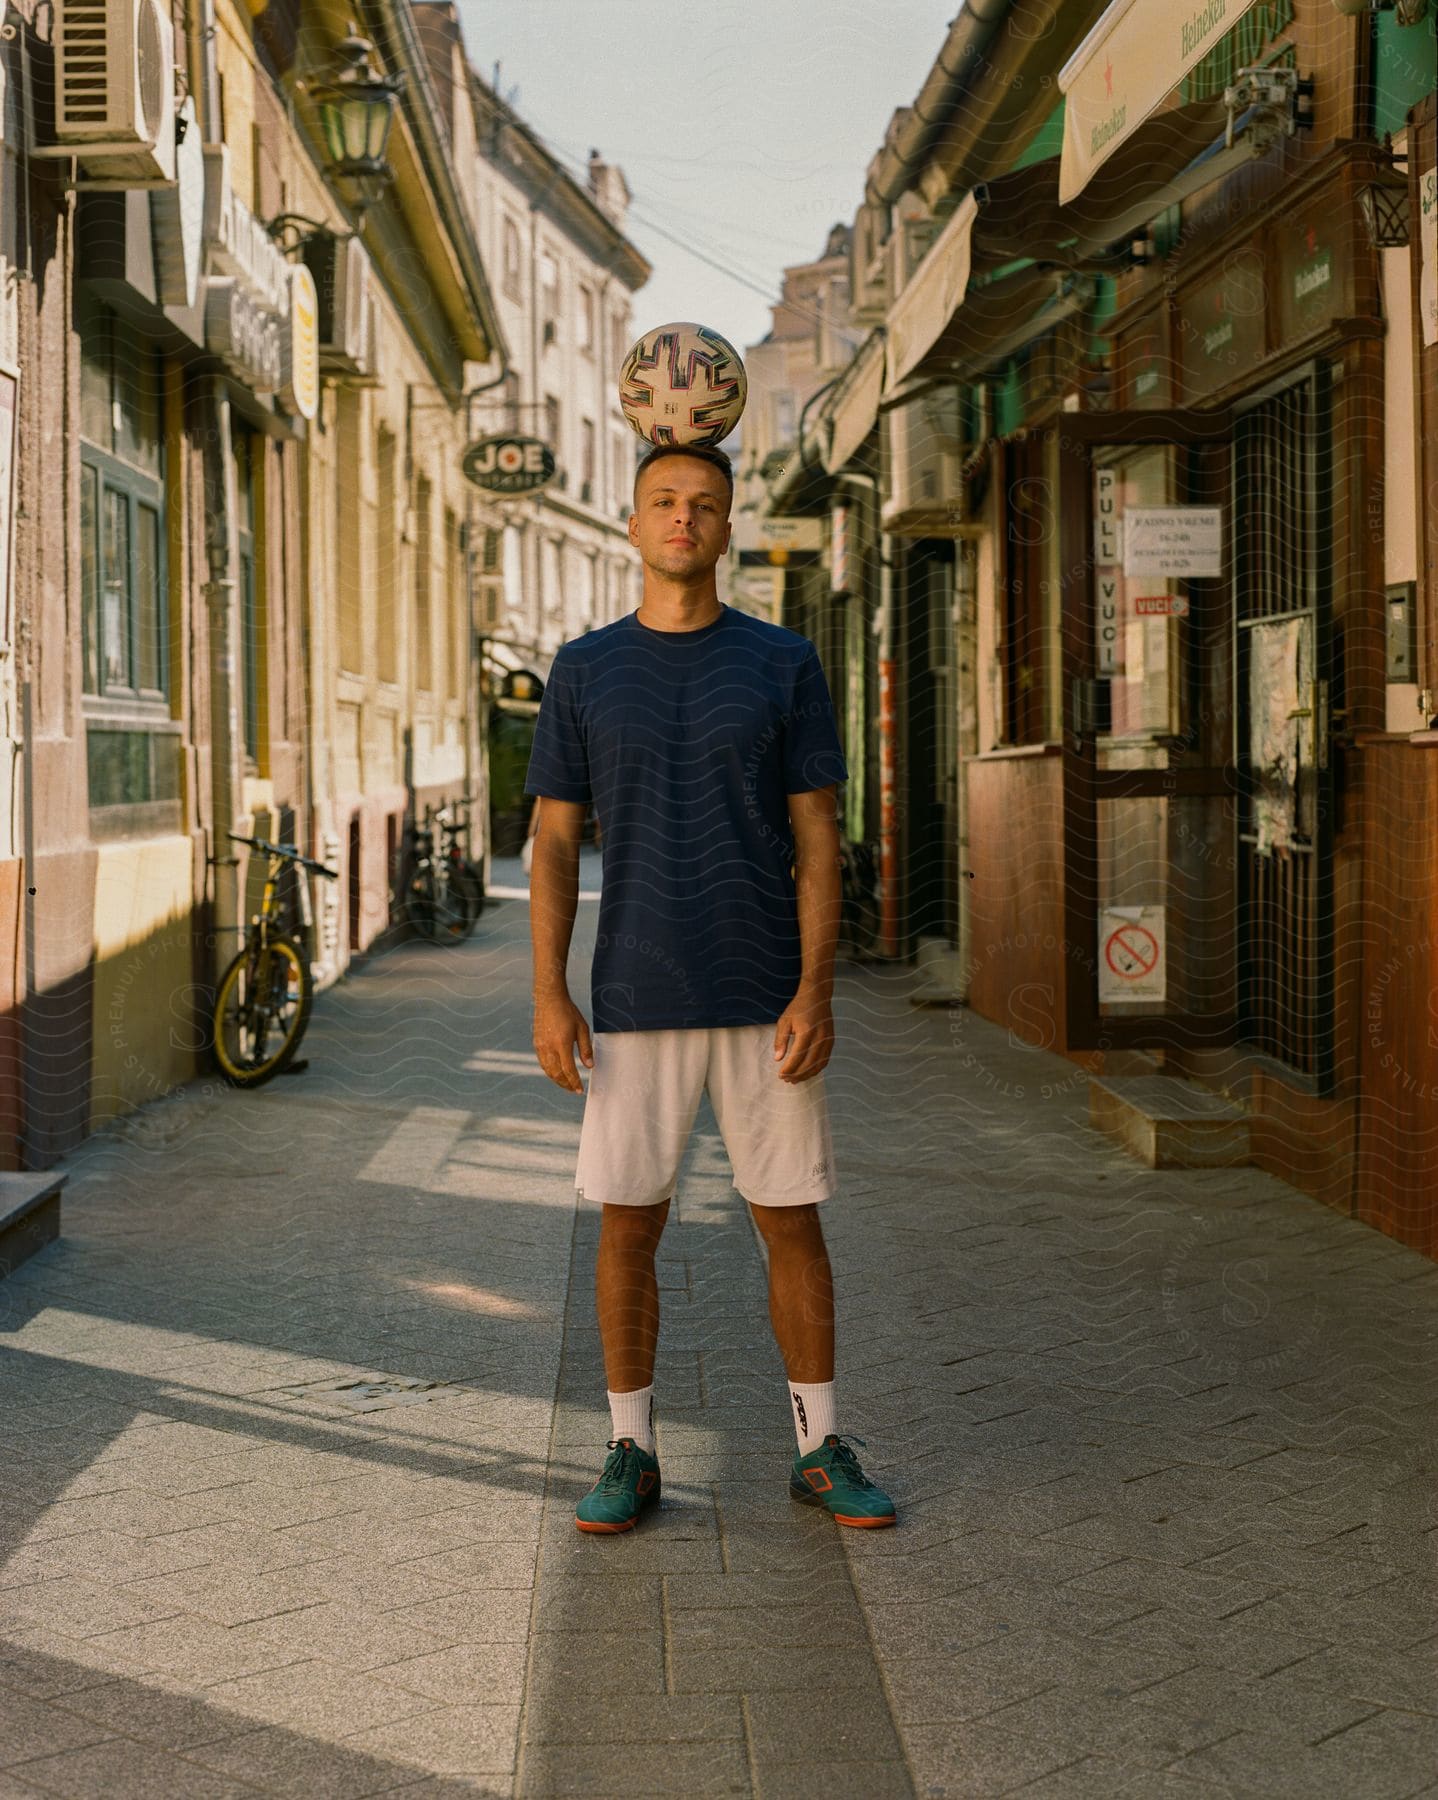 A man wearing a navy T-shirt, white shorts, socks, and green shoes stands in the narrow downtown area.